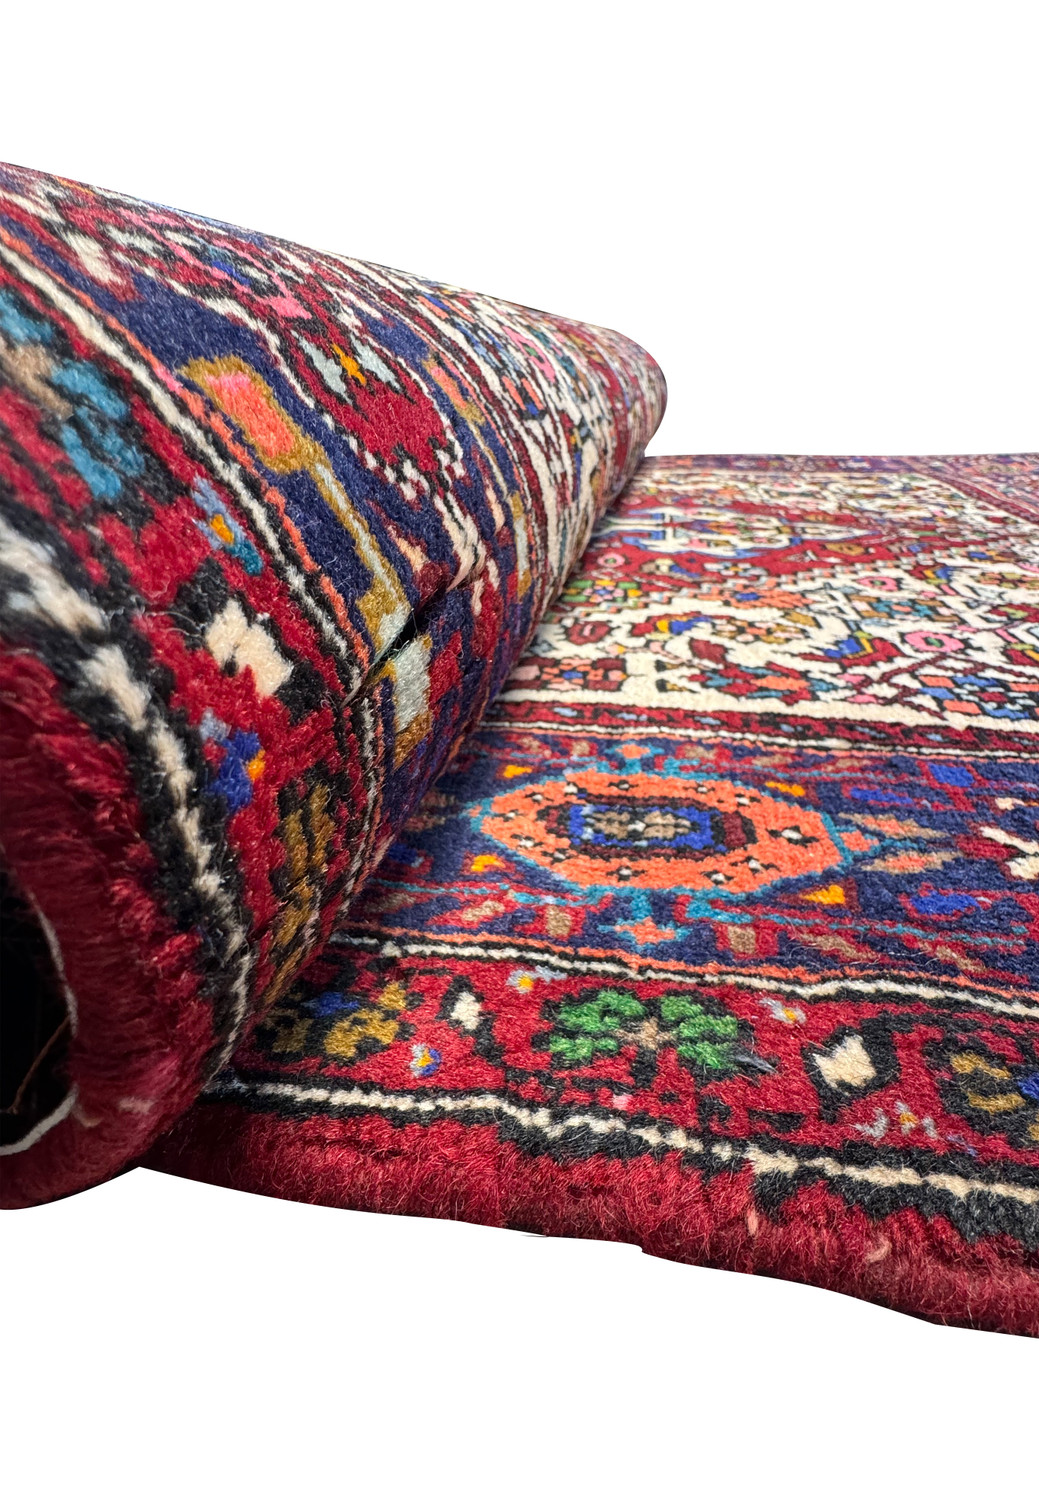 A section of the 3'3 x 5 Persian Bijar rug rolled up, revealing the density of the weave and the rug's plush pile.